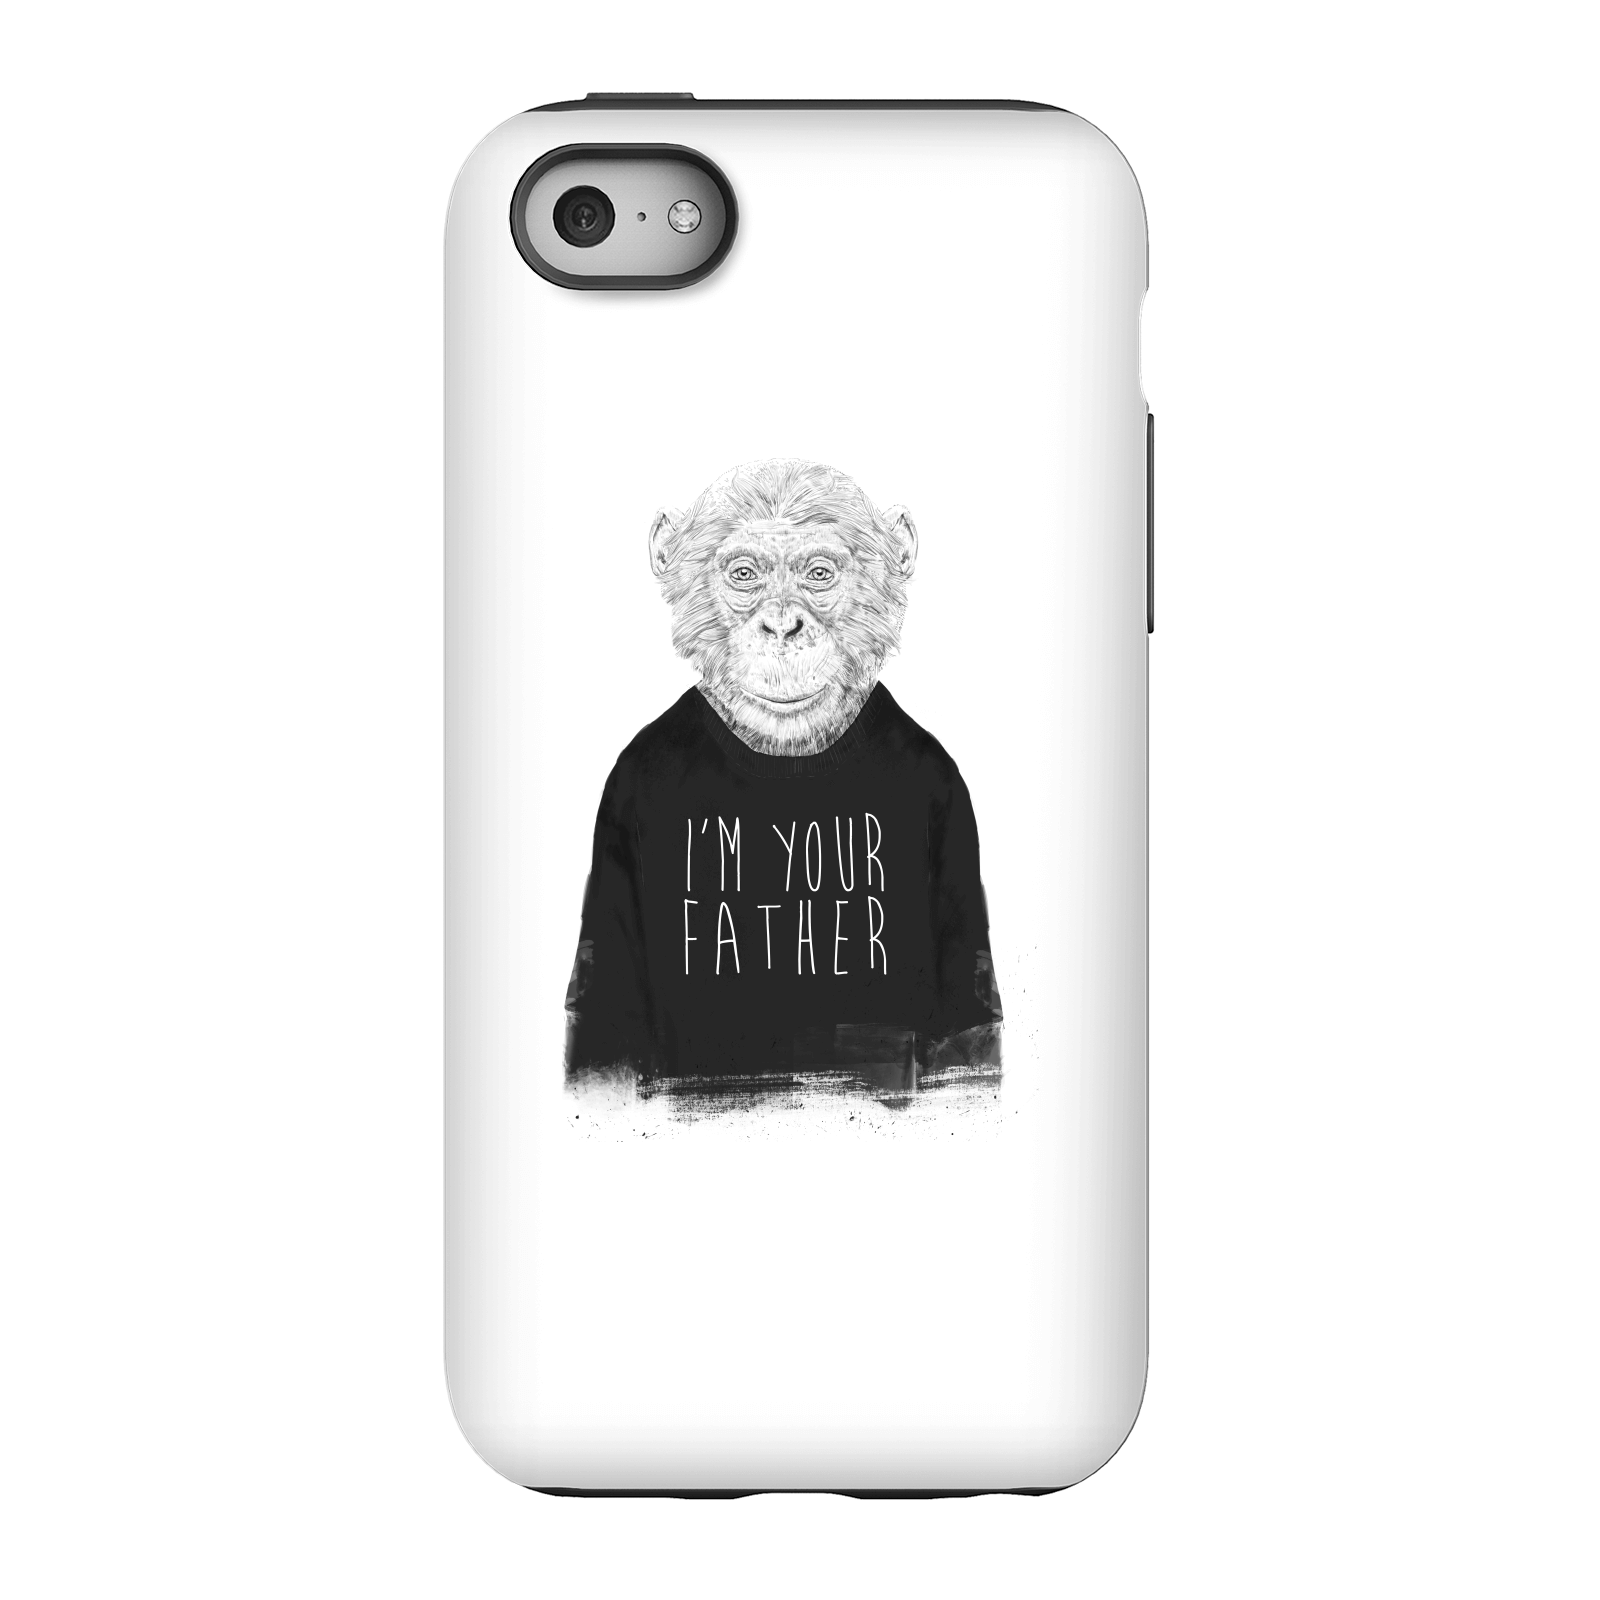 Balazs Solti I'm Your Father Phone Case for iPhone and Android - iPhone 5C - Tough Case - Gloss